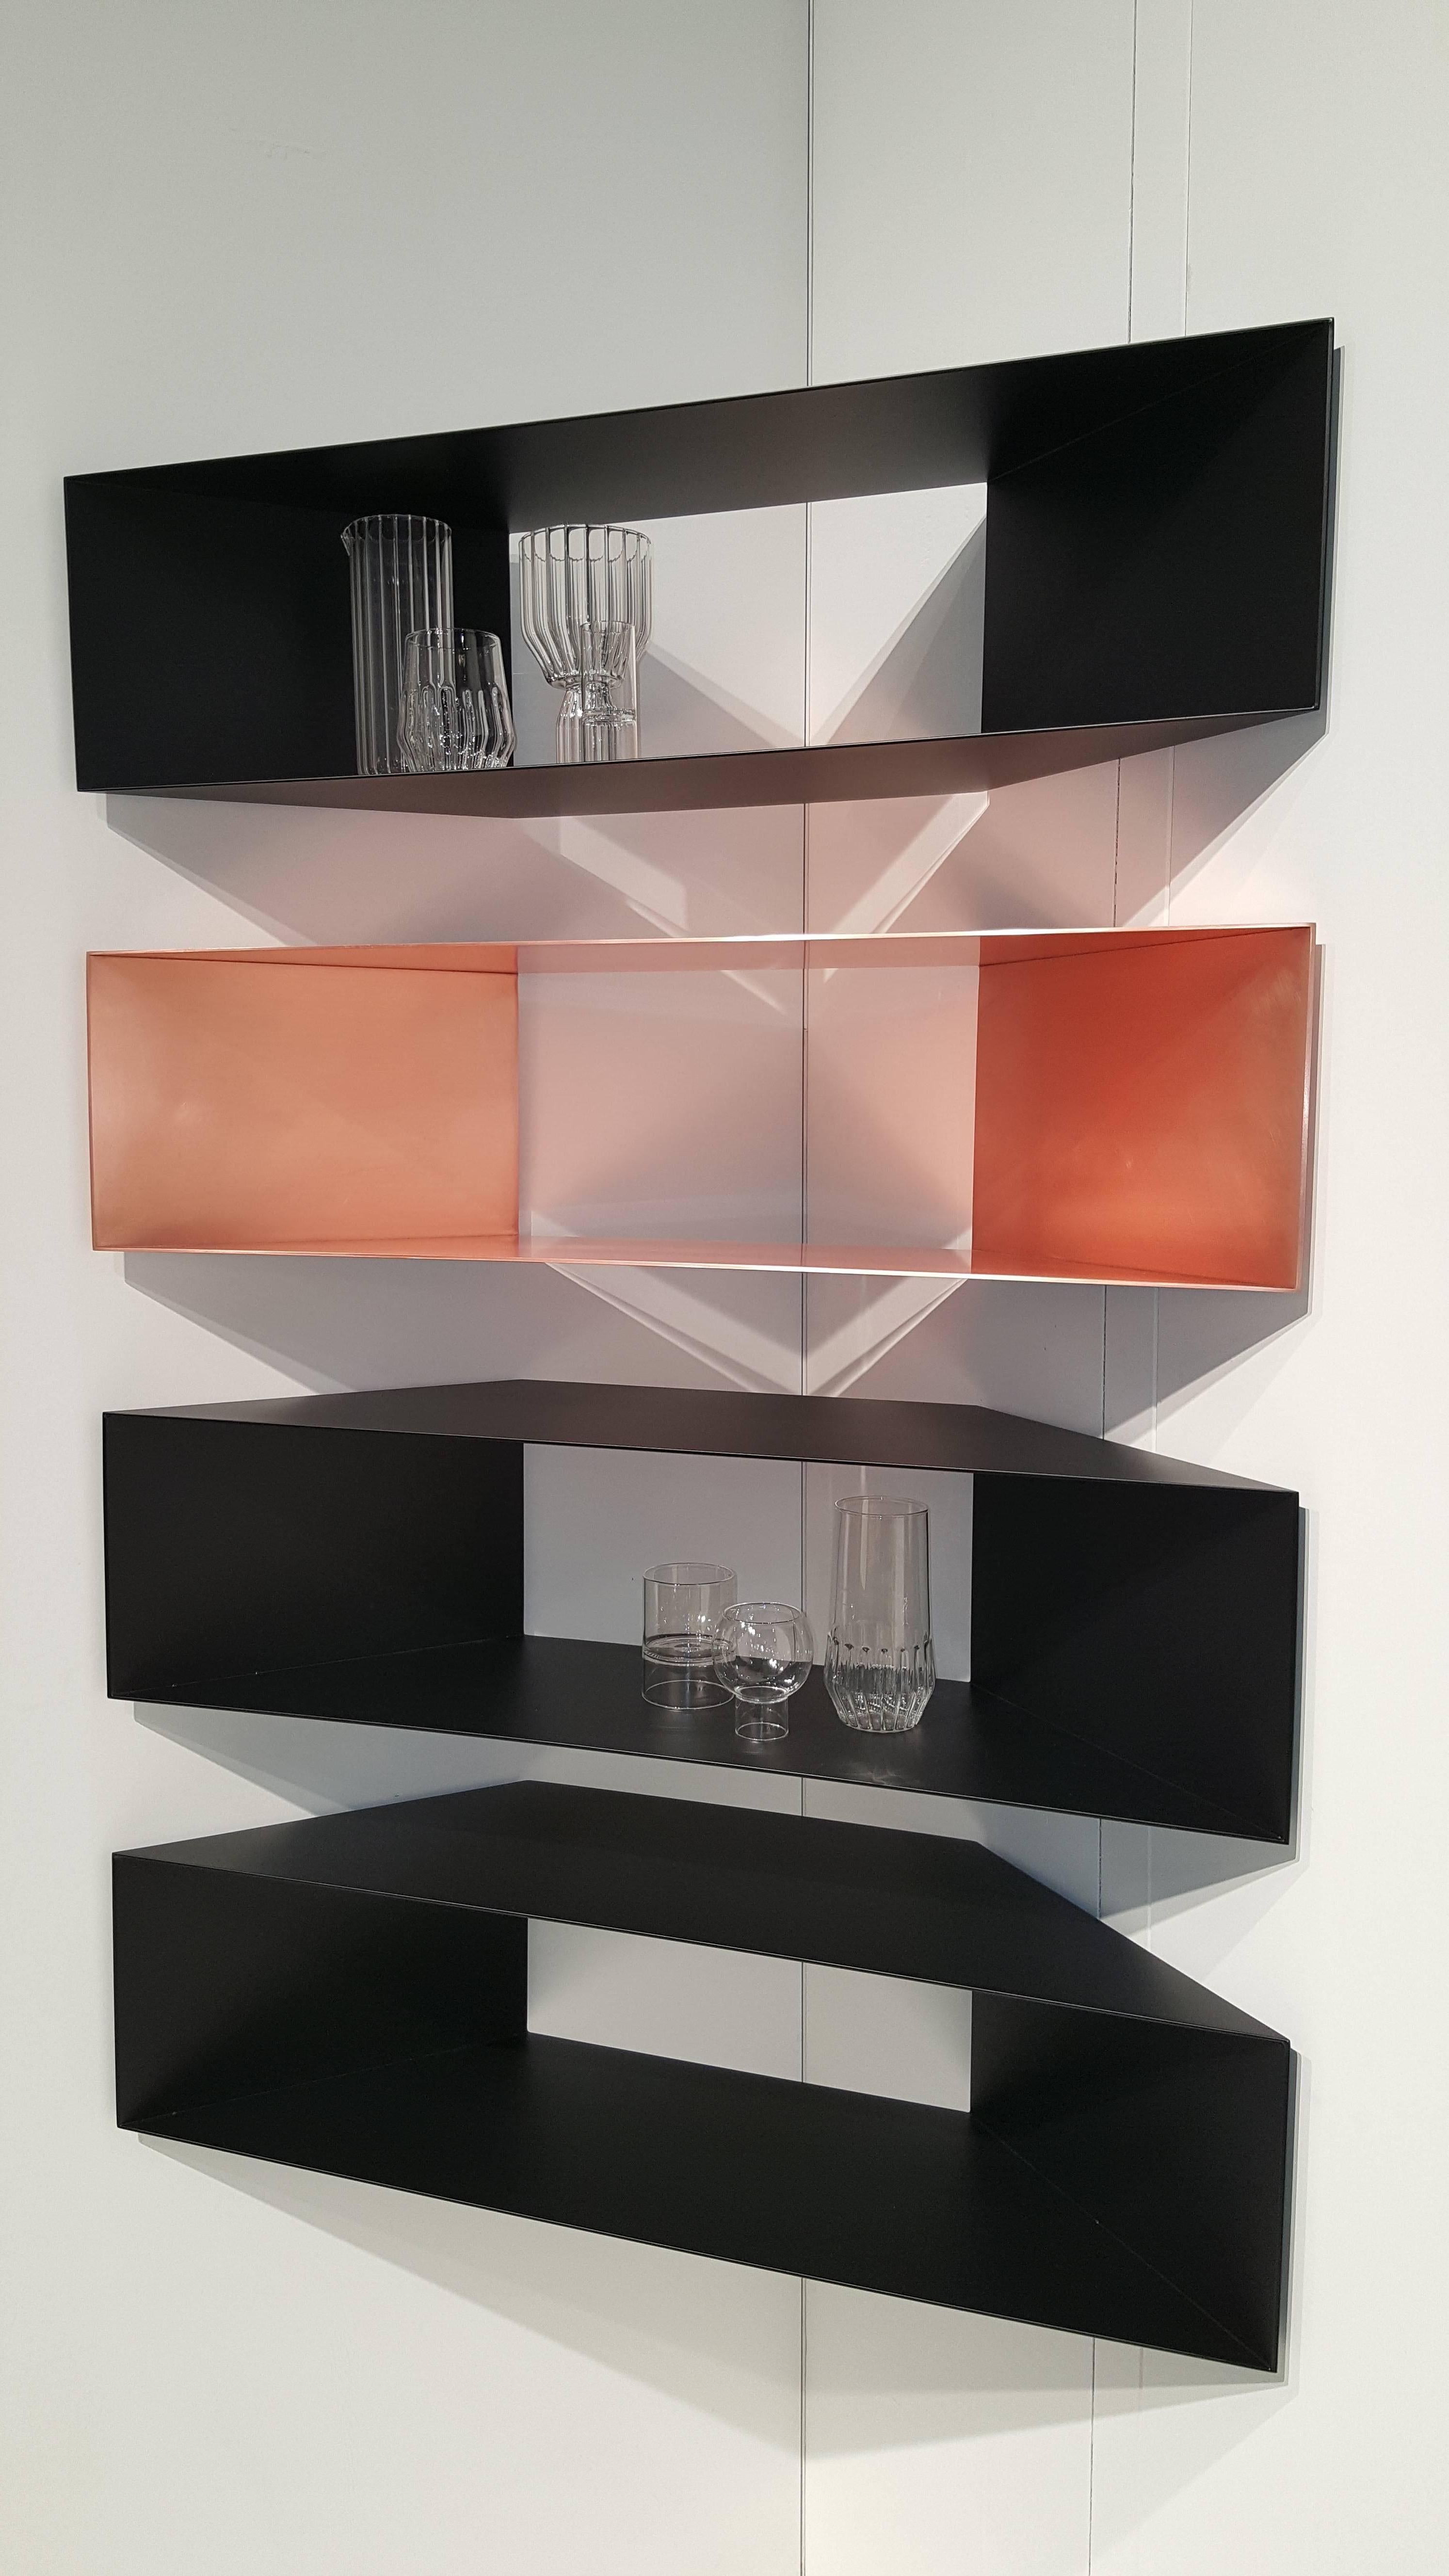 This contemporary sculptural single copper metal minimal corner shelf is perfect for any space be it a living room, office, or bathroom.

In stock: These Minimalist copper shelves, whether installed individually or in a series, occupy a space in a